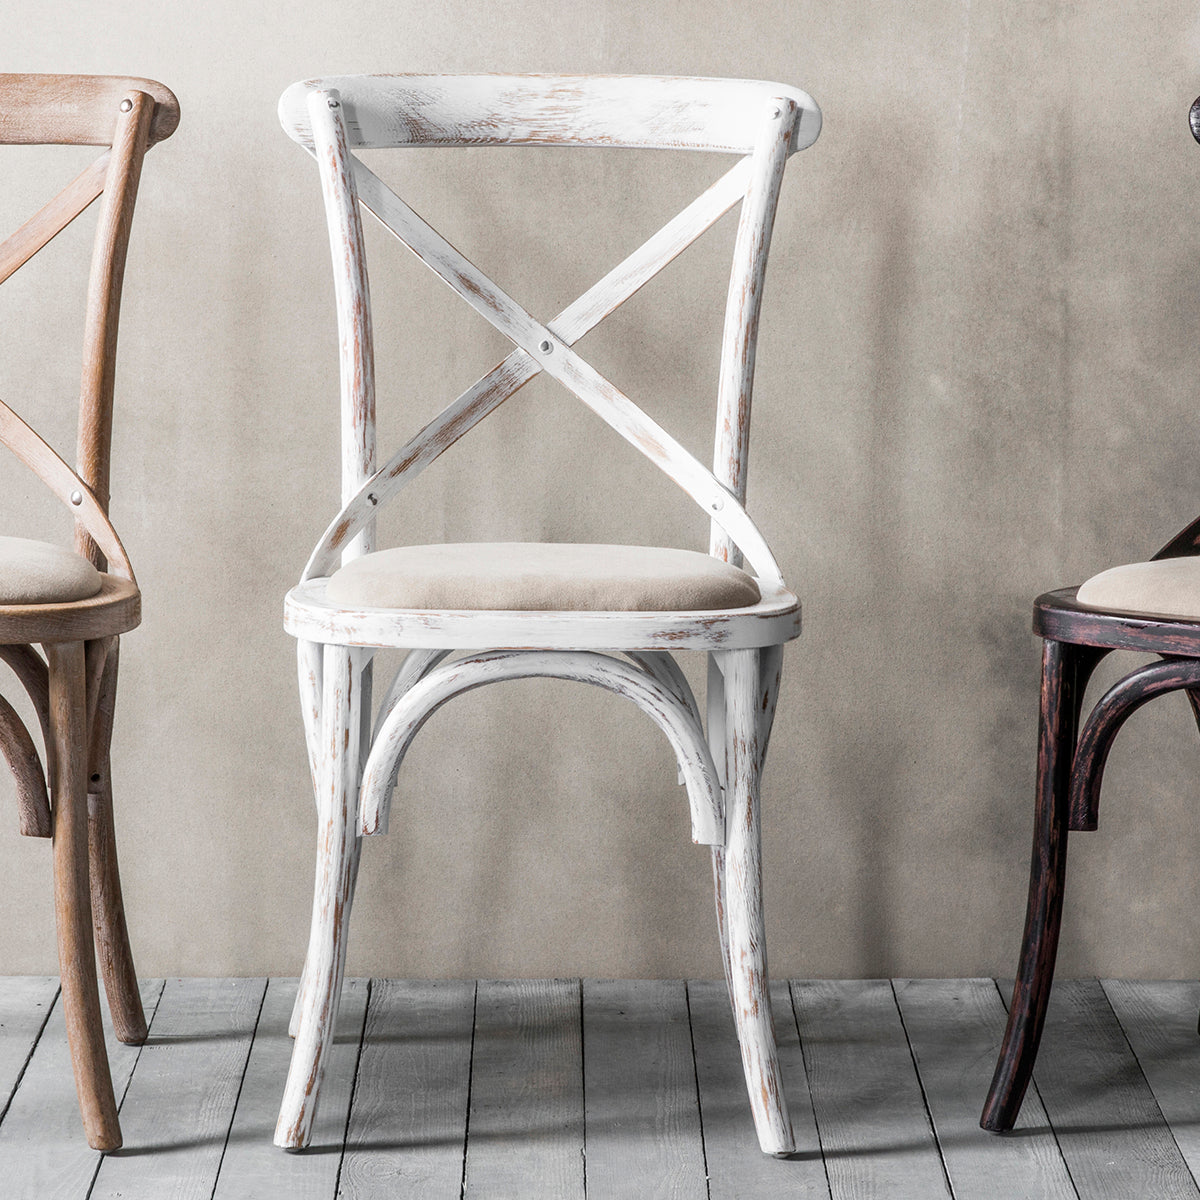 Three cafe chairs from Kikiathome.co.uk are lined up against a wall, adding to the interior decor of the space.